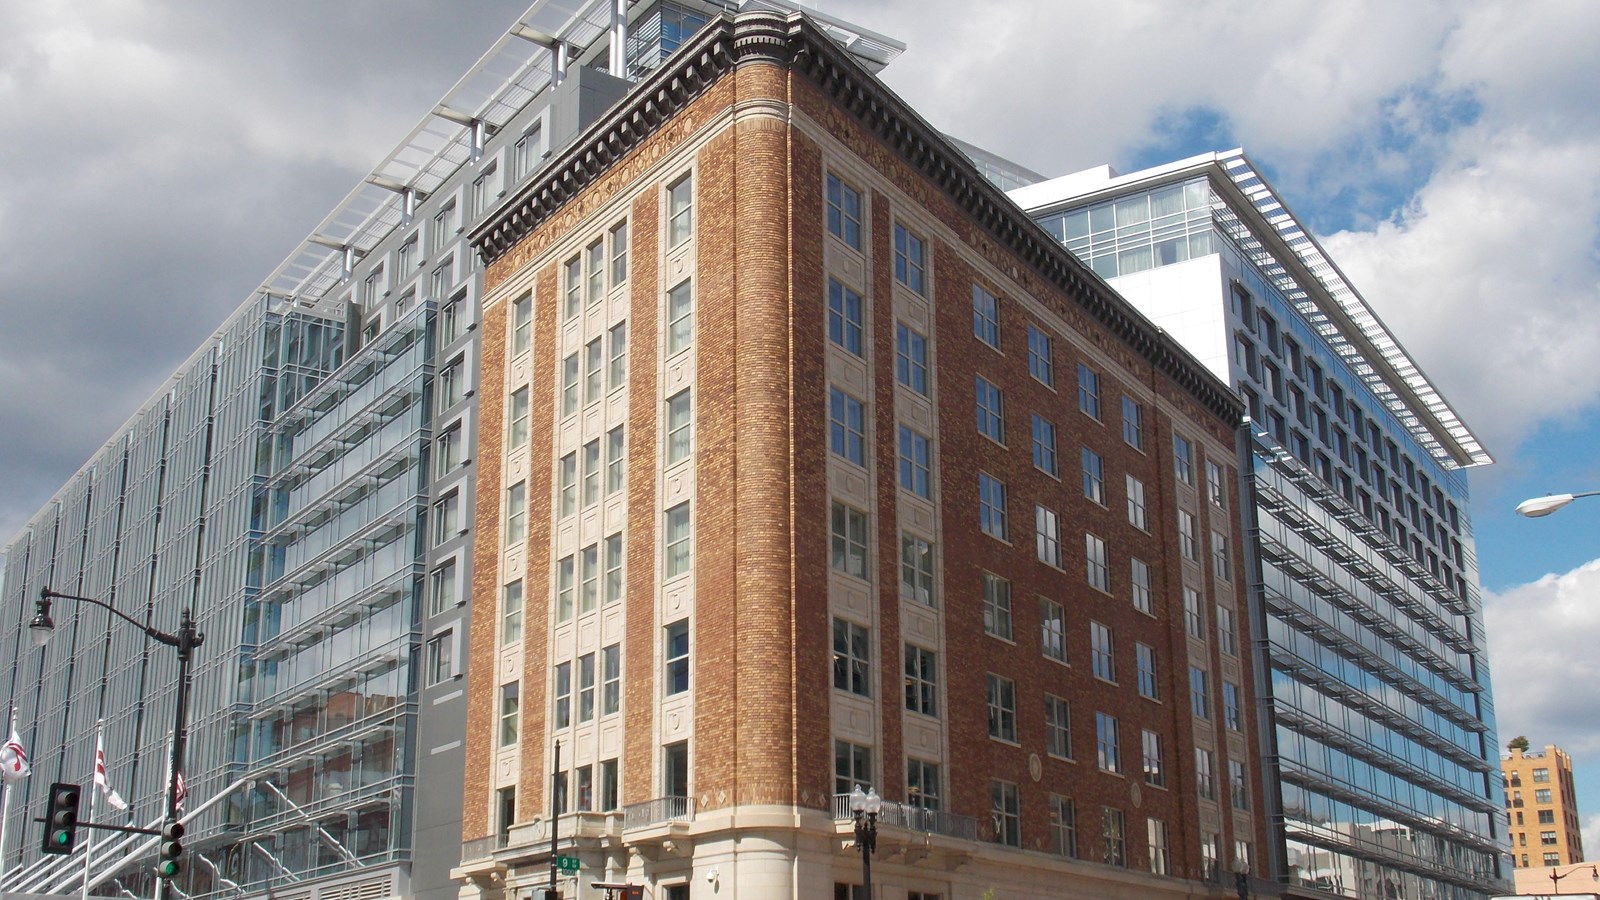 A seven story brick building forms the corner of a city block and is connected to a glass building.